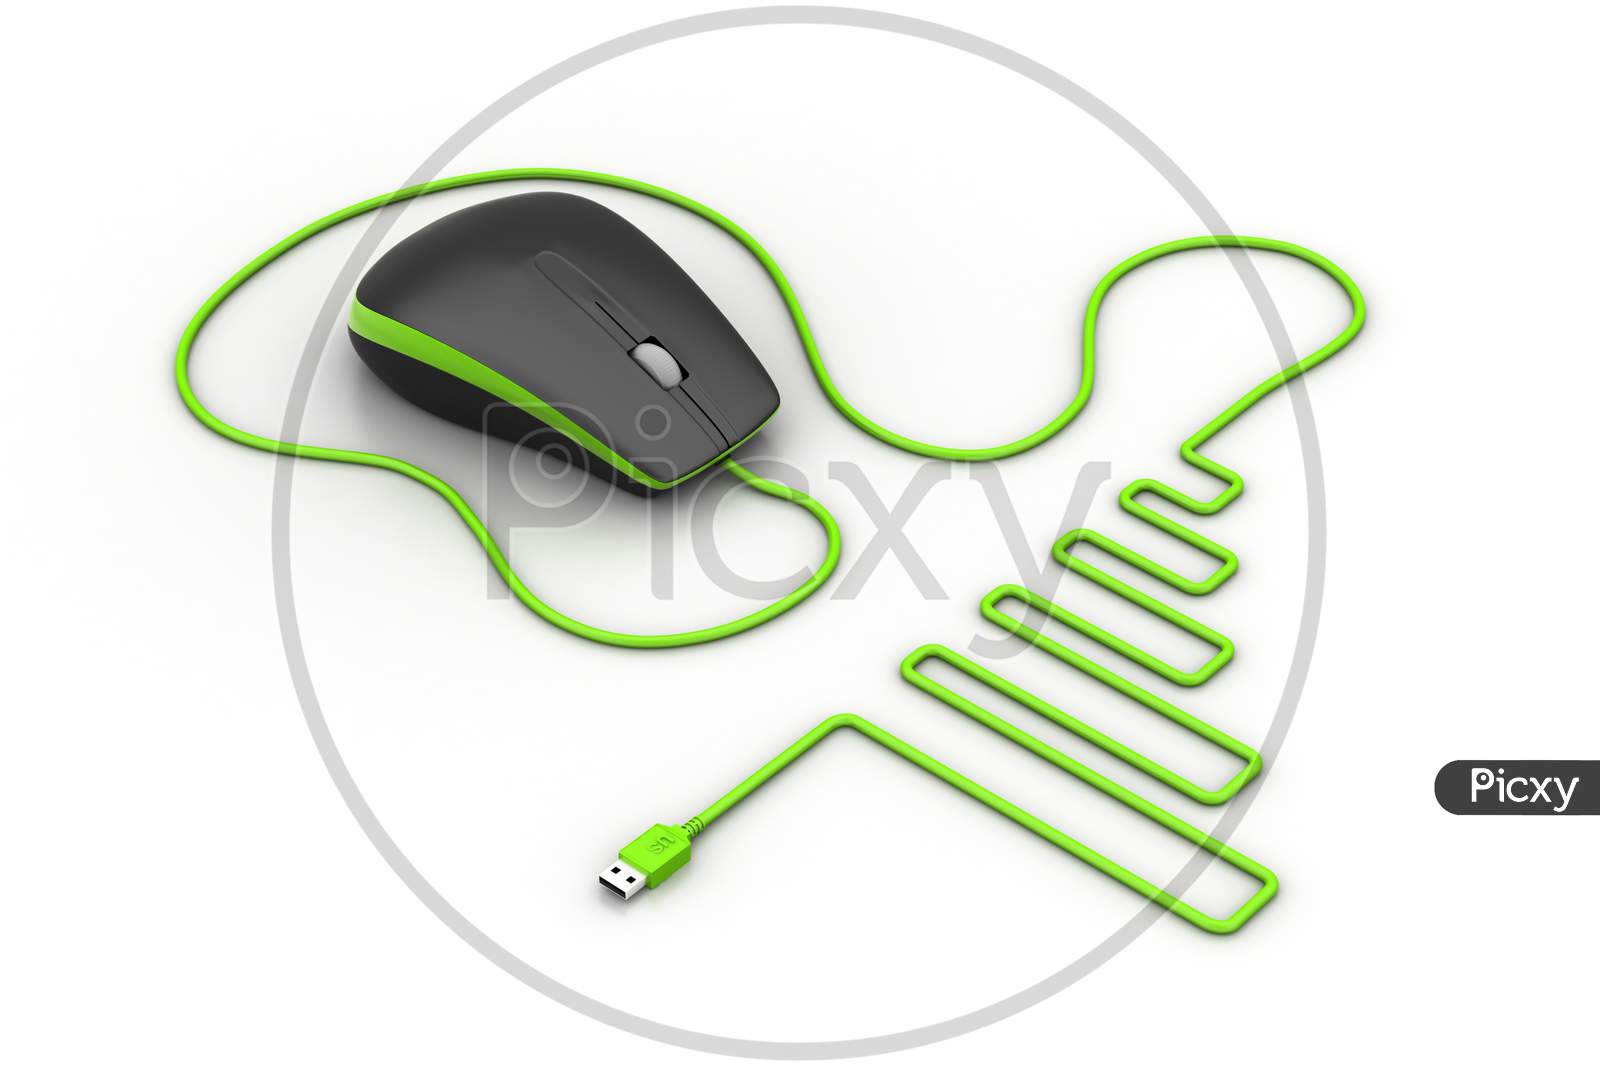 Computer Mouse With Cable